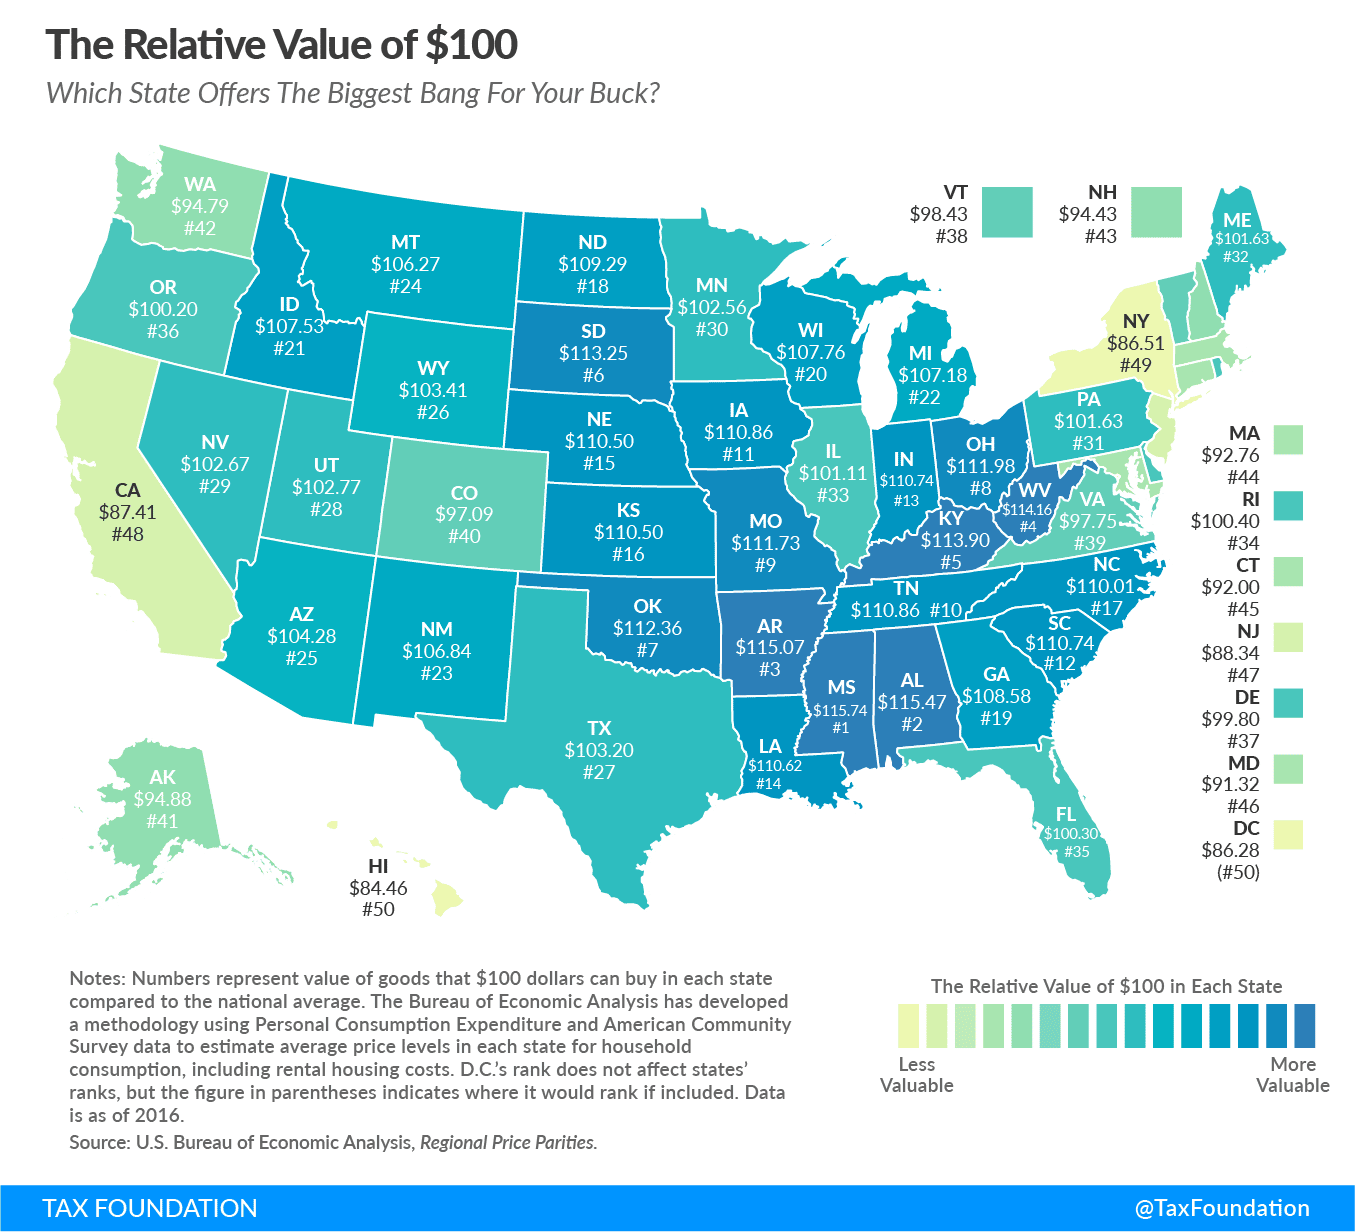 The real value of $100 in New York is just $86.51